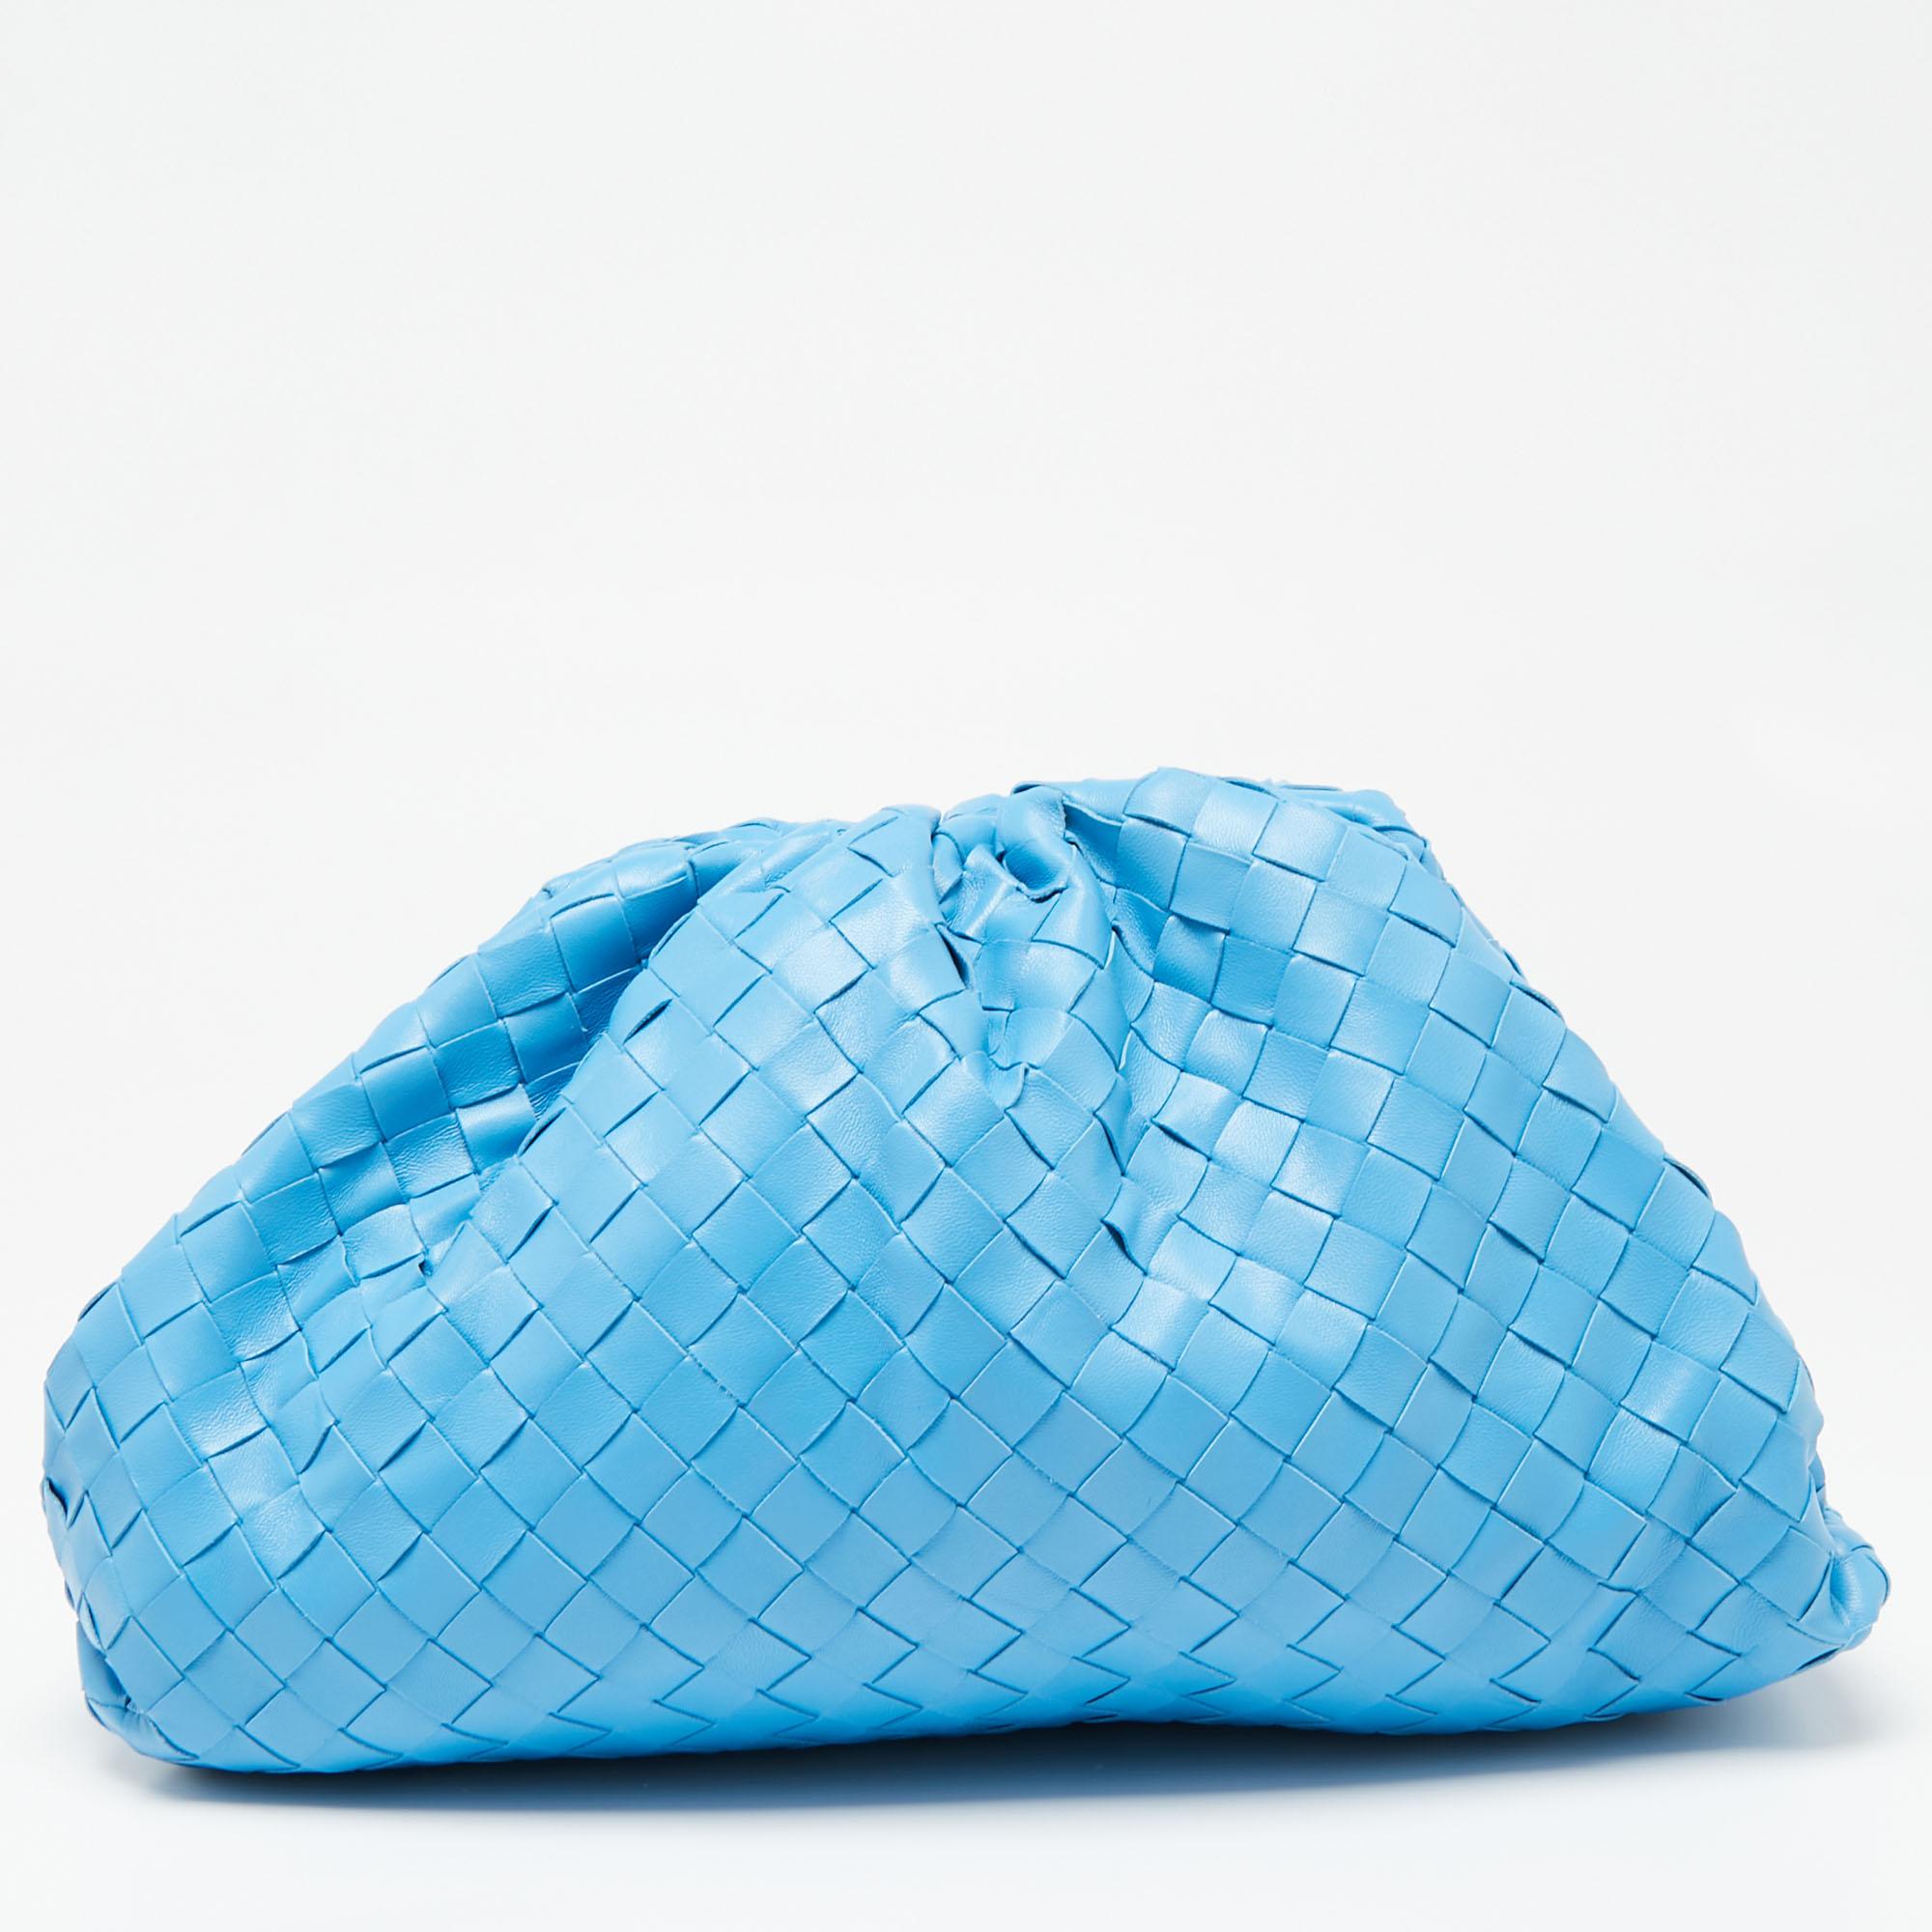 Timeless elegance and contemporary shape come paired together in this Bottega Veneta clutch. Created from Intrecciato leather into a pouch silhouette, this blue creation will be your favorite grab-and-go companion. The perfectly sized interior of